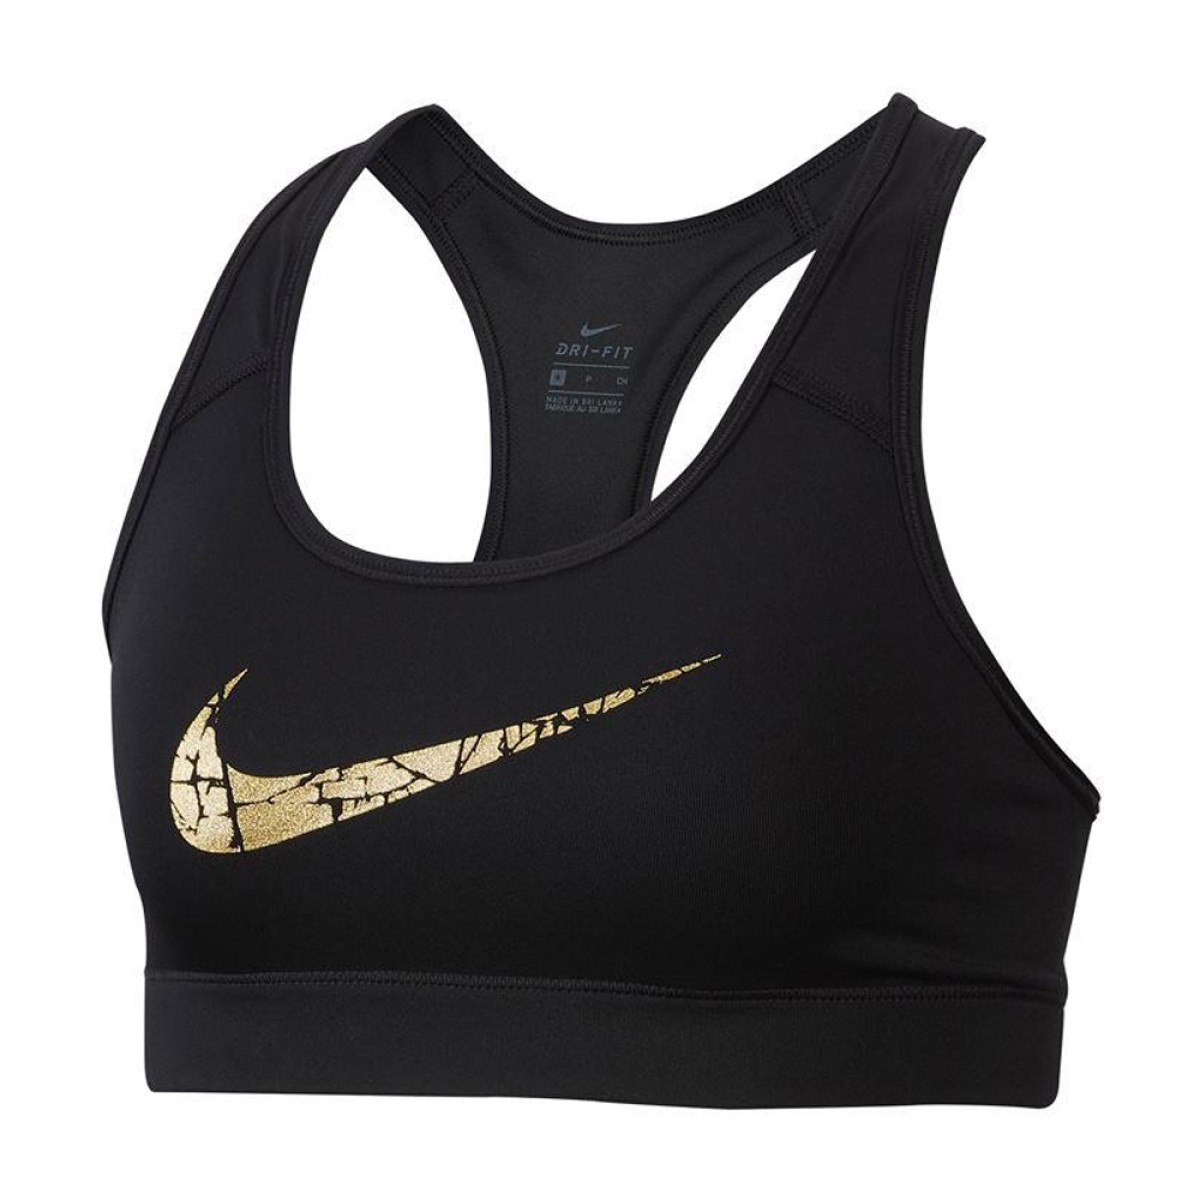 The Nike Victory Sports Bra is designed for supportive comfort during ...